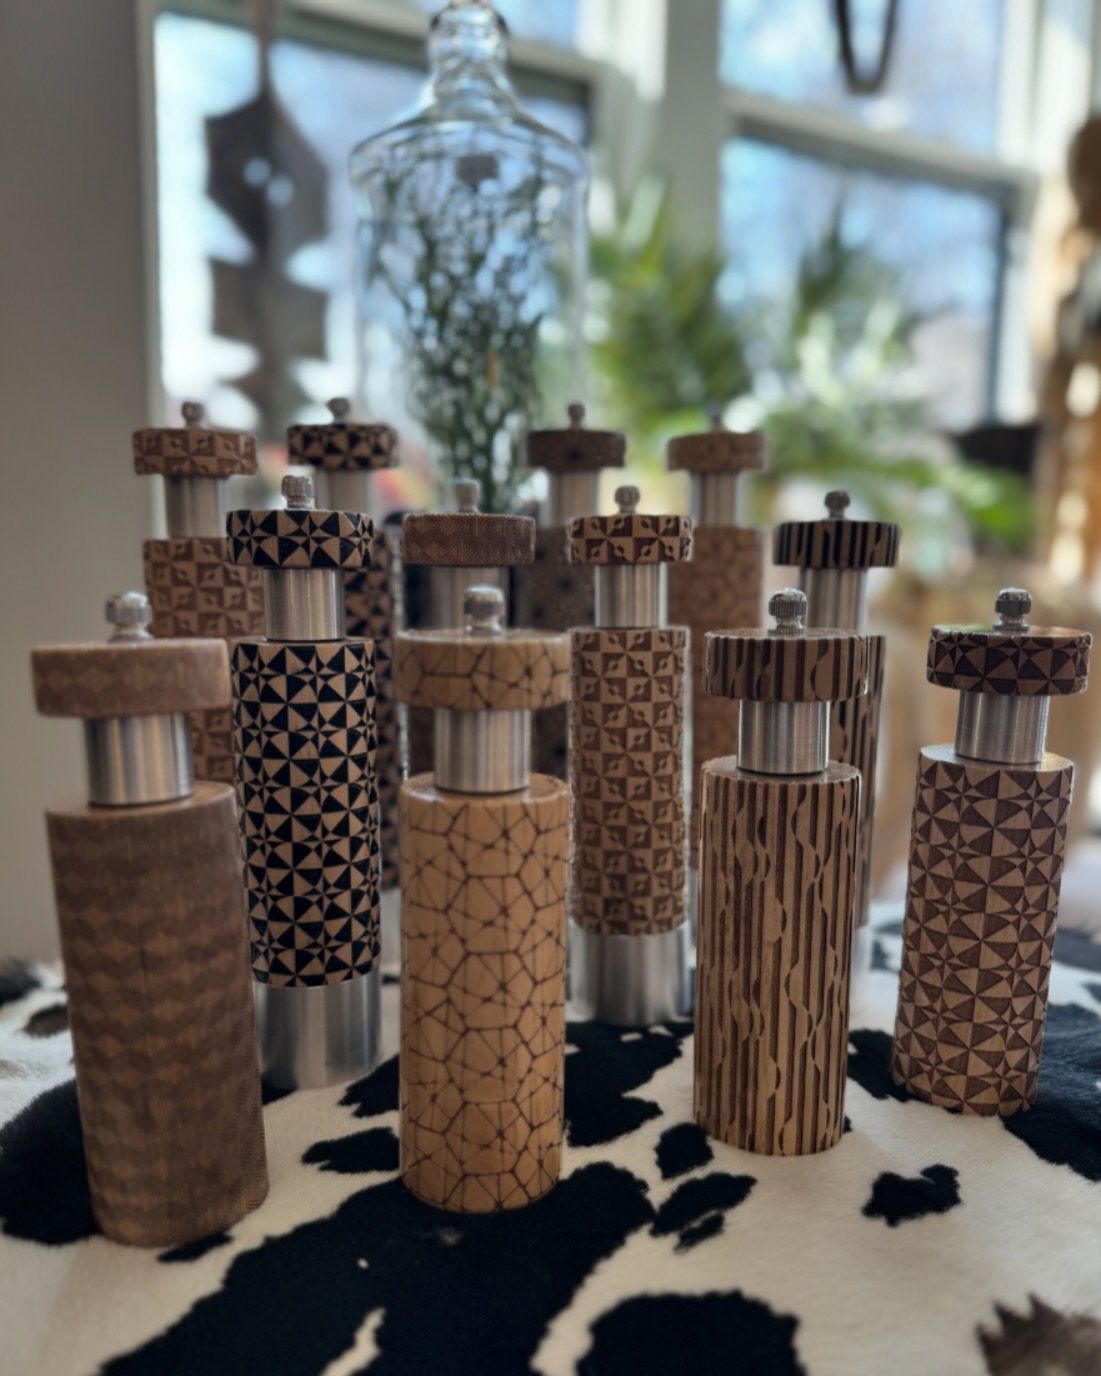 Take a look at these awesome new grinders ✨

Crafted with precision and passion, each piece is artistically crafted yet durable. Embrace the artistry of cooking with tools that are as beautiful as they are practical. 

Stop in and find all of our uni